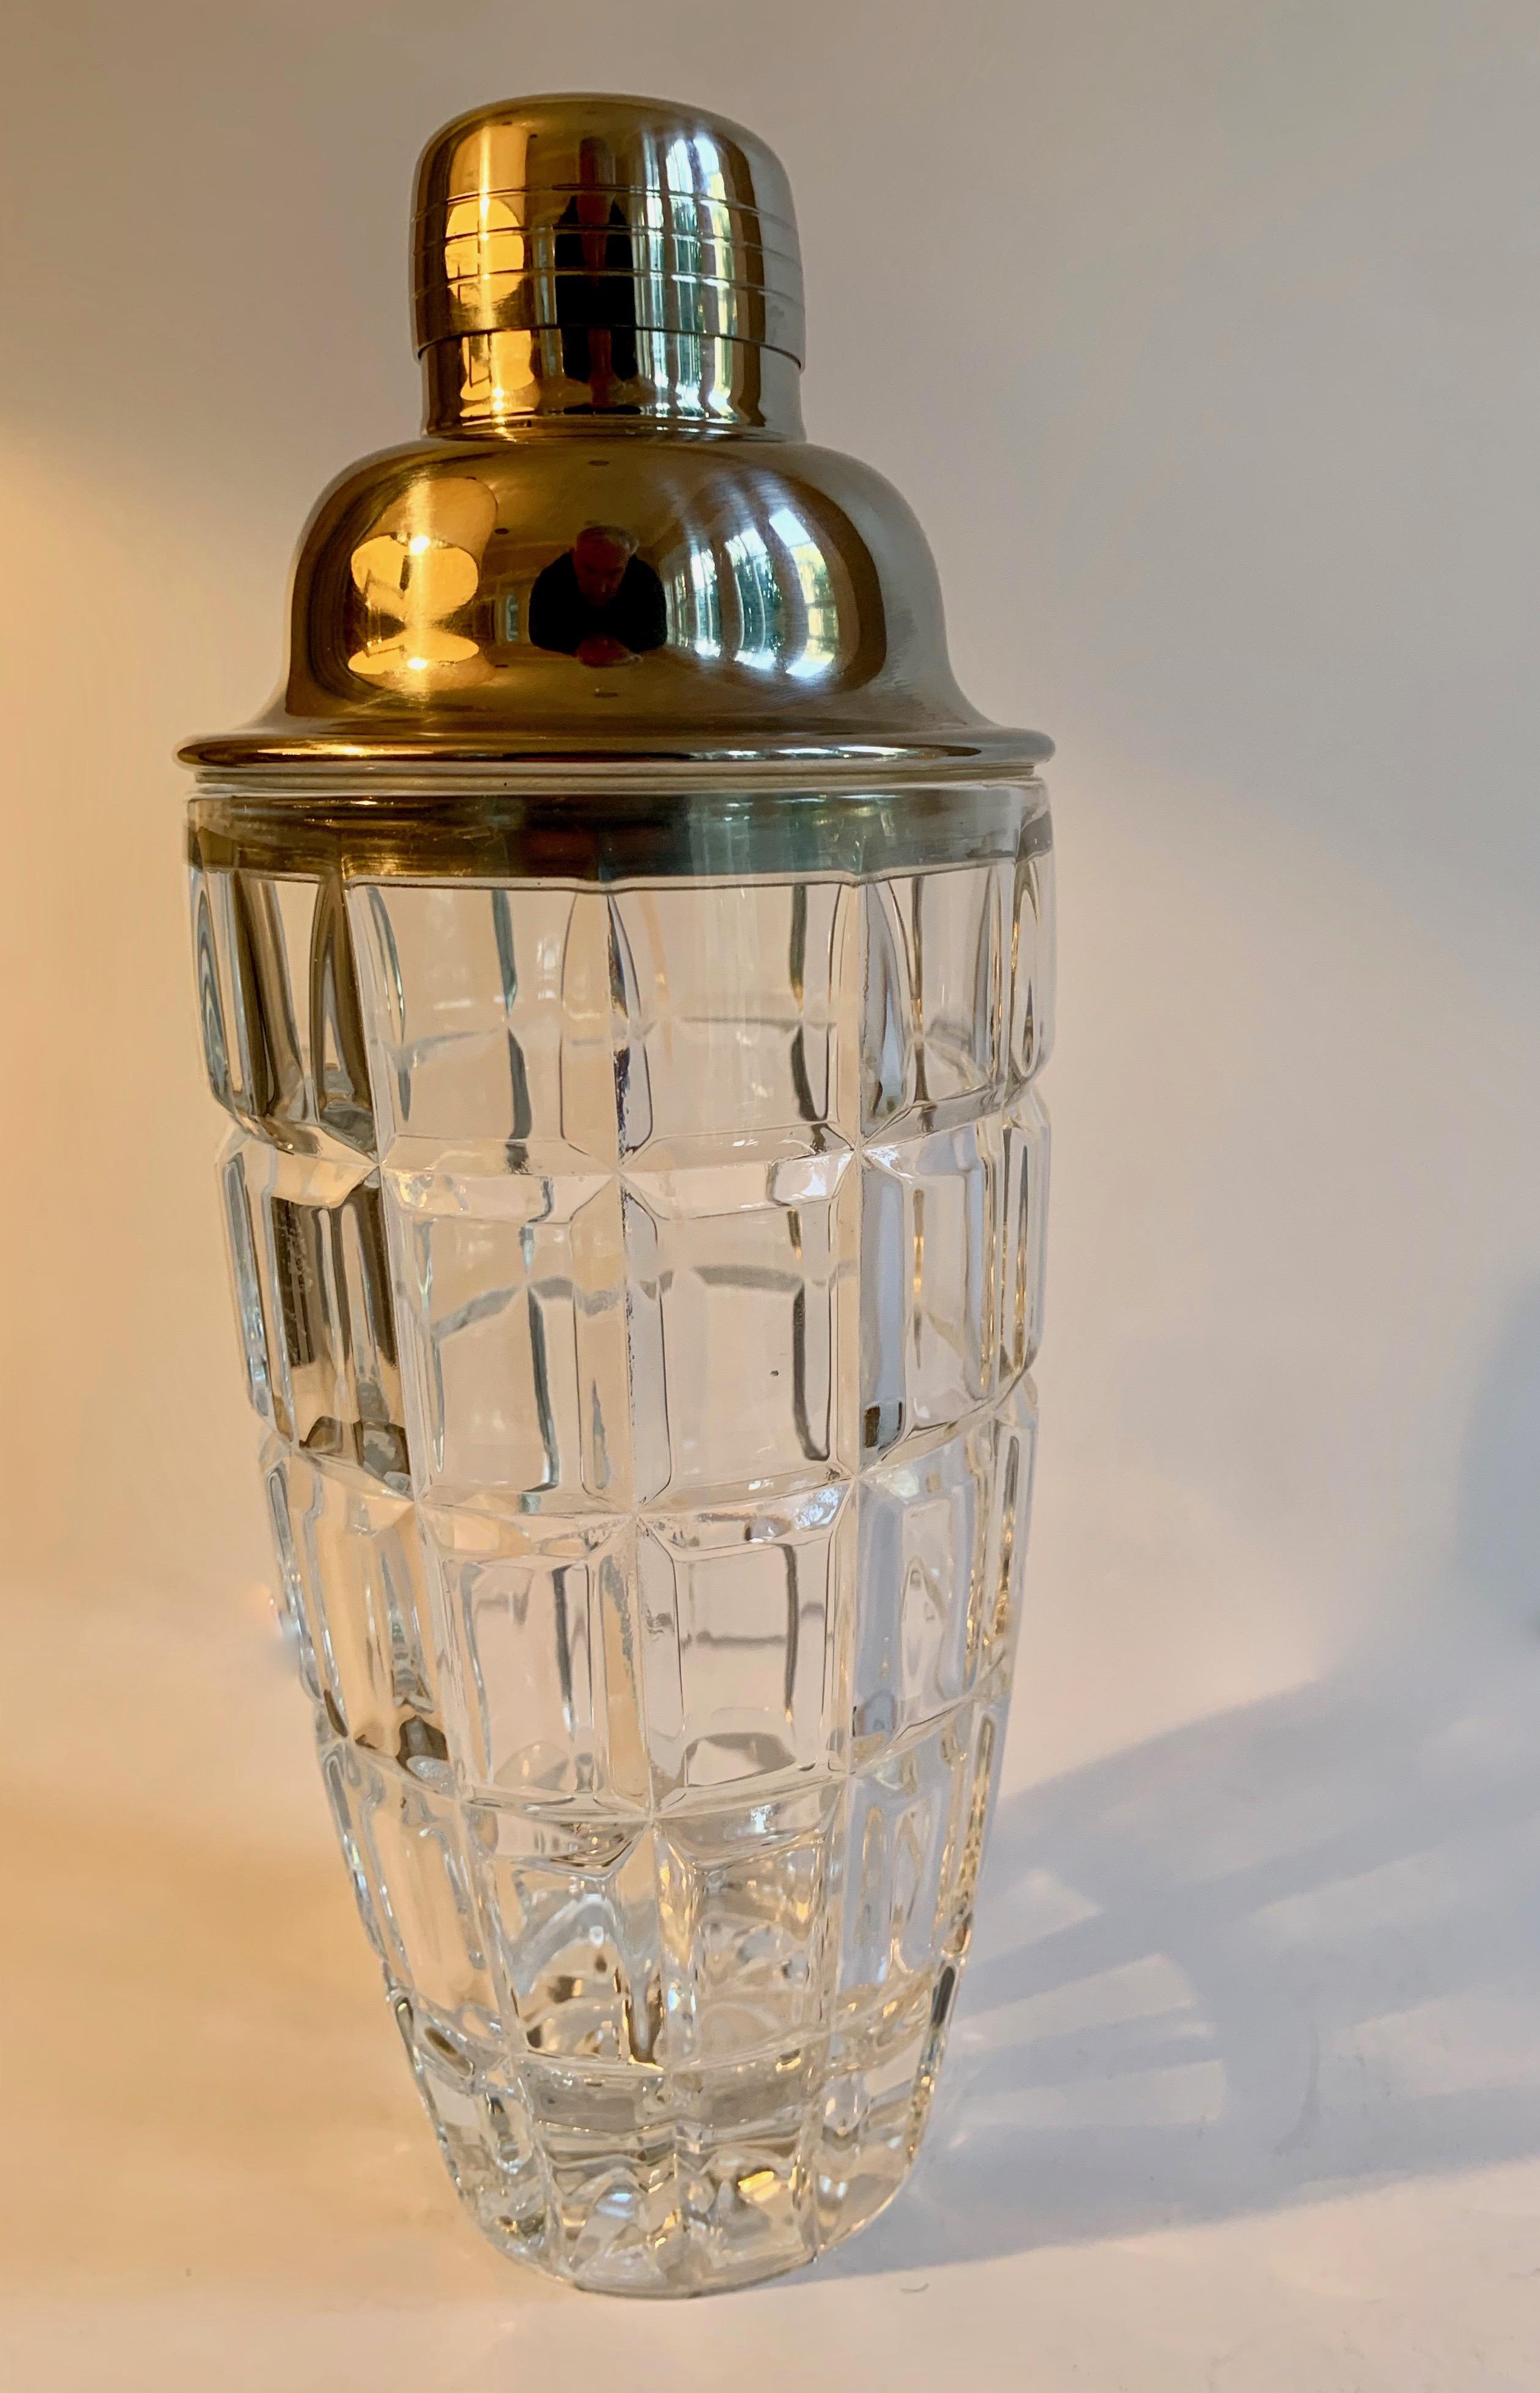 Stunning cut crystal cocktail shaker, crystal portion has leak proof rubber connection. The crystal shaker can stand alone as a vessel, or could even be a vase!